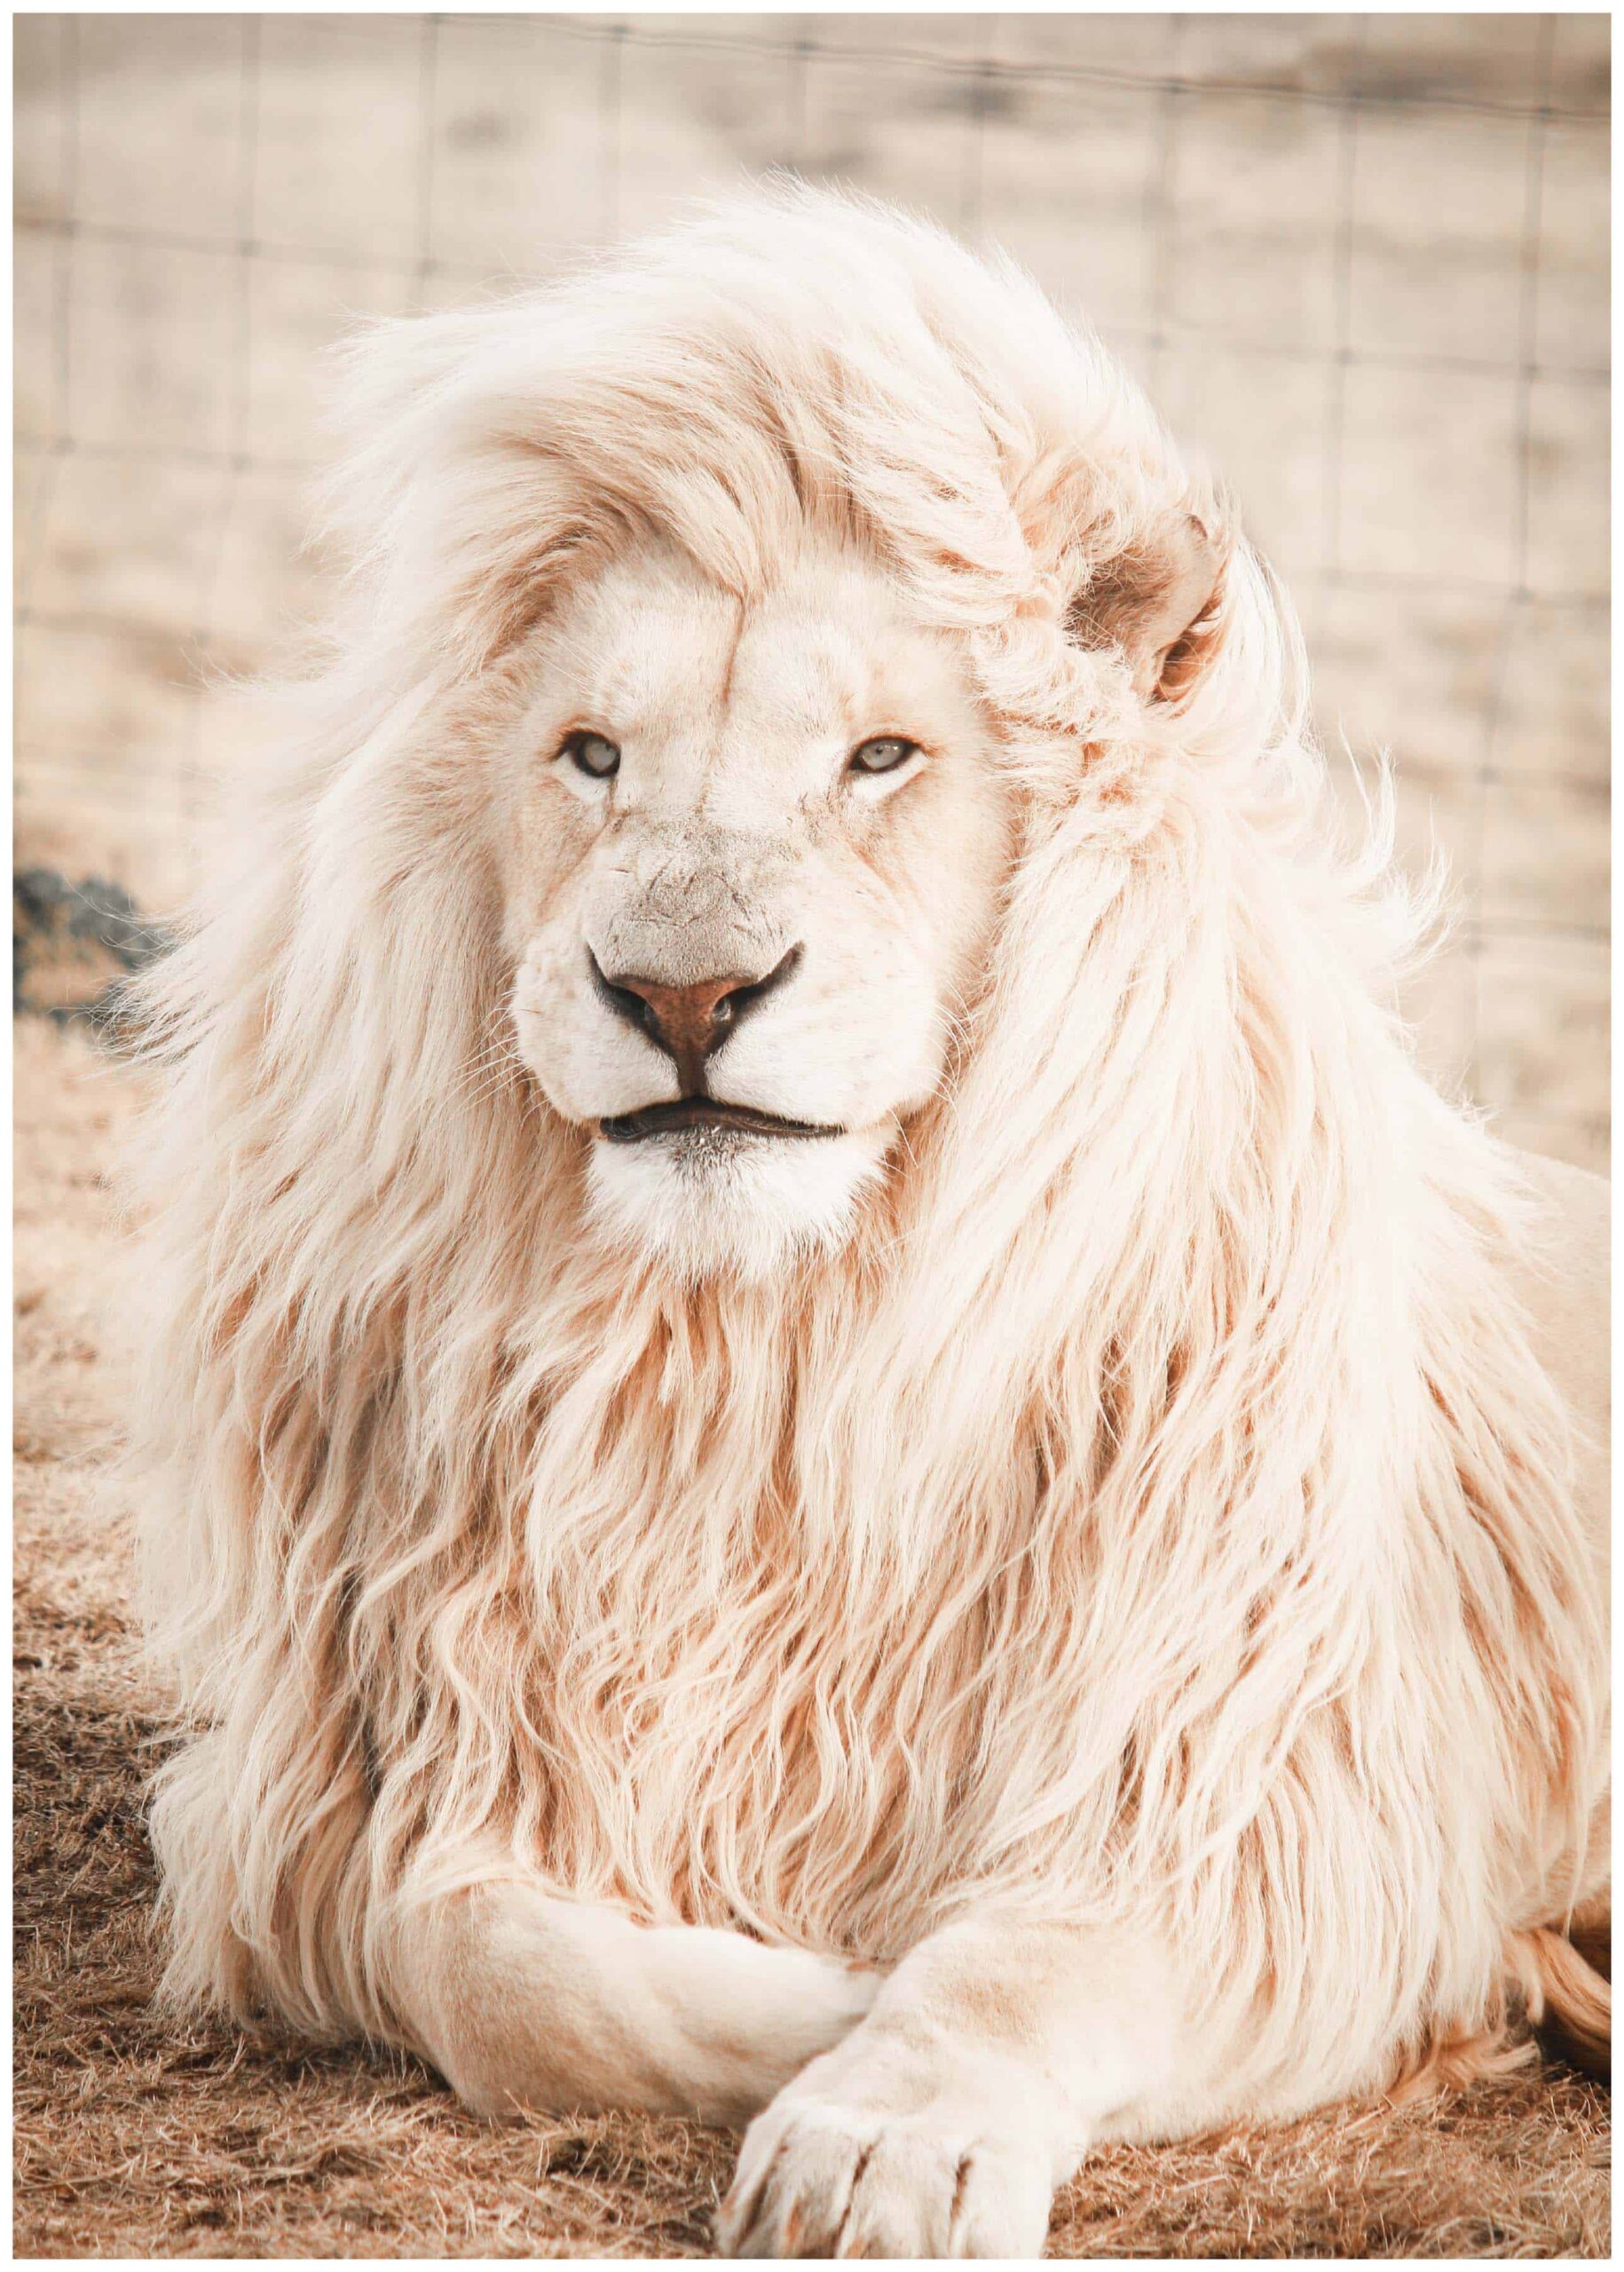 White lion poster | Print by Artsy Bucket